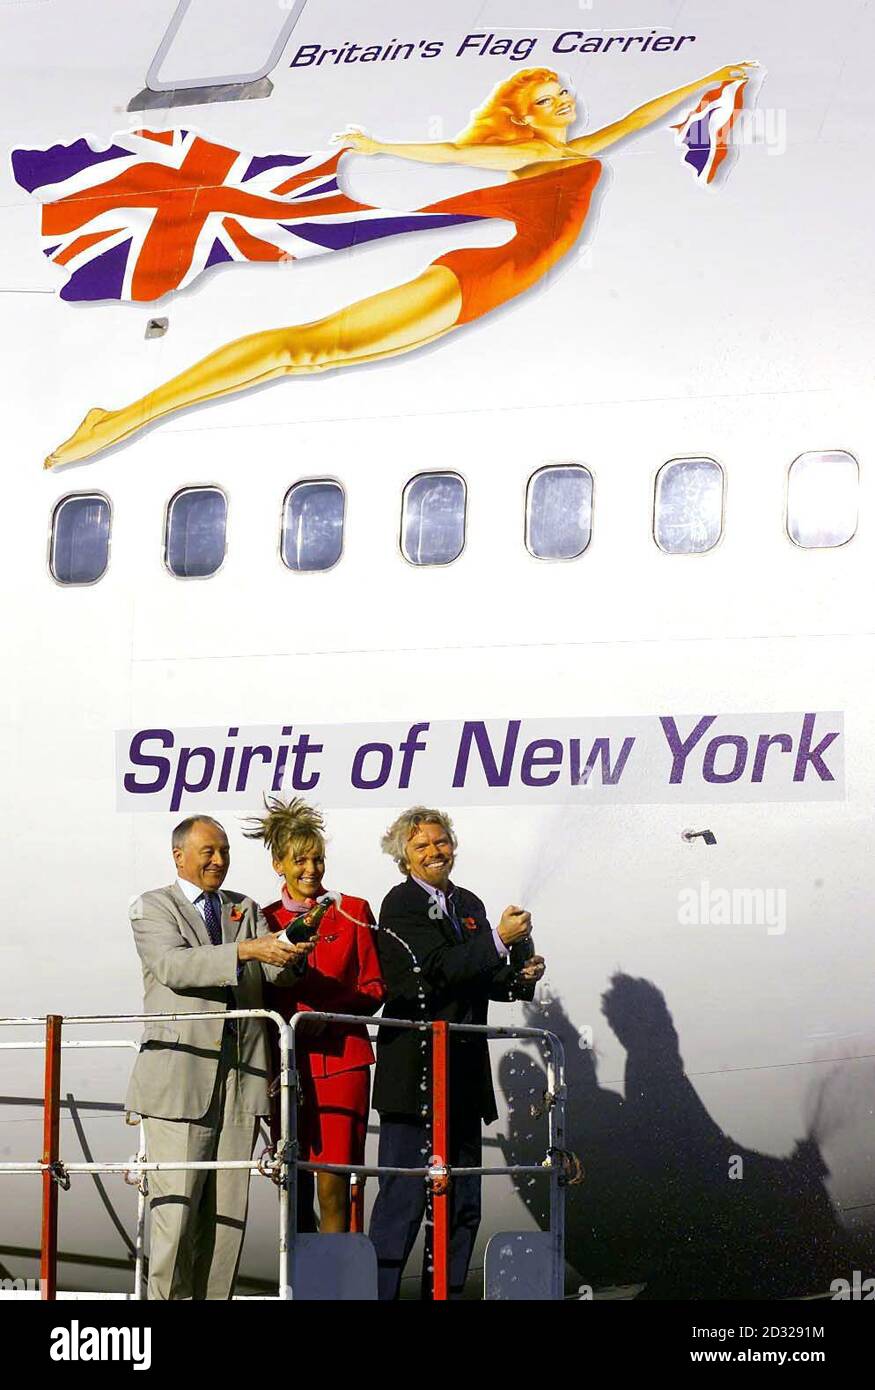 London Mayor Ken Livingstone (L) and Sir Richard Branson, the Virgin Atlantic chairman unveil the renamed Virgin Atlantic 747 Spirit of New York to represent the spirit and solidarity and support between the people of London and New York.   * The plane is also been fitted with a newly armour-plated cockpit door which was a necessary safety change after the September 11 suicide hijackings which destroyed the World Trade Centre and part of the Pentagon.  Stock Photo